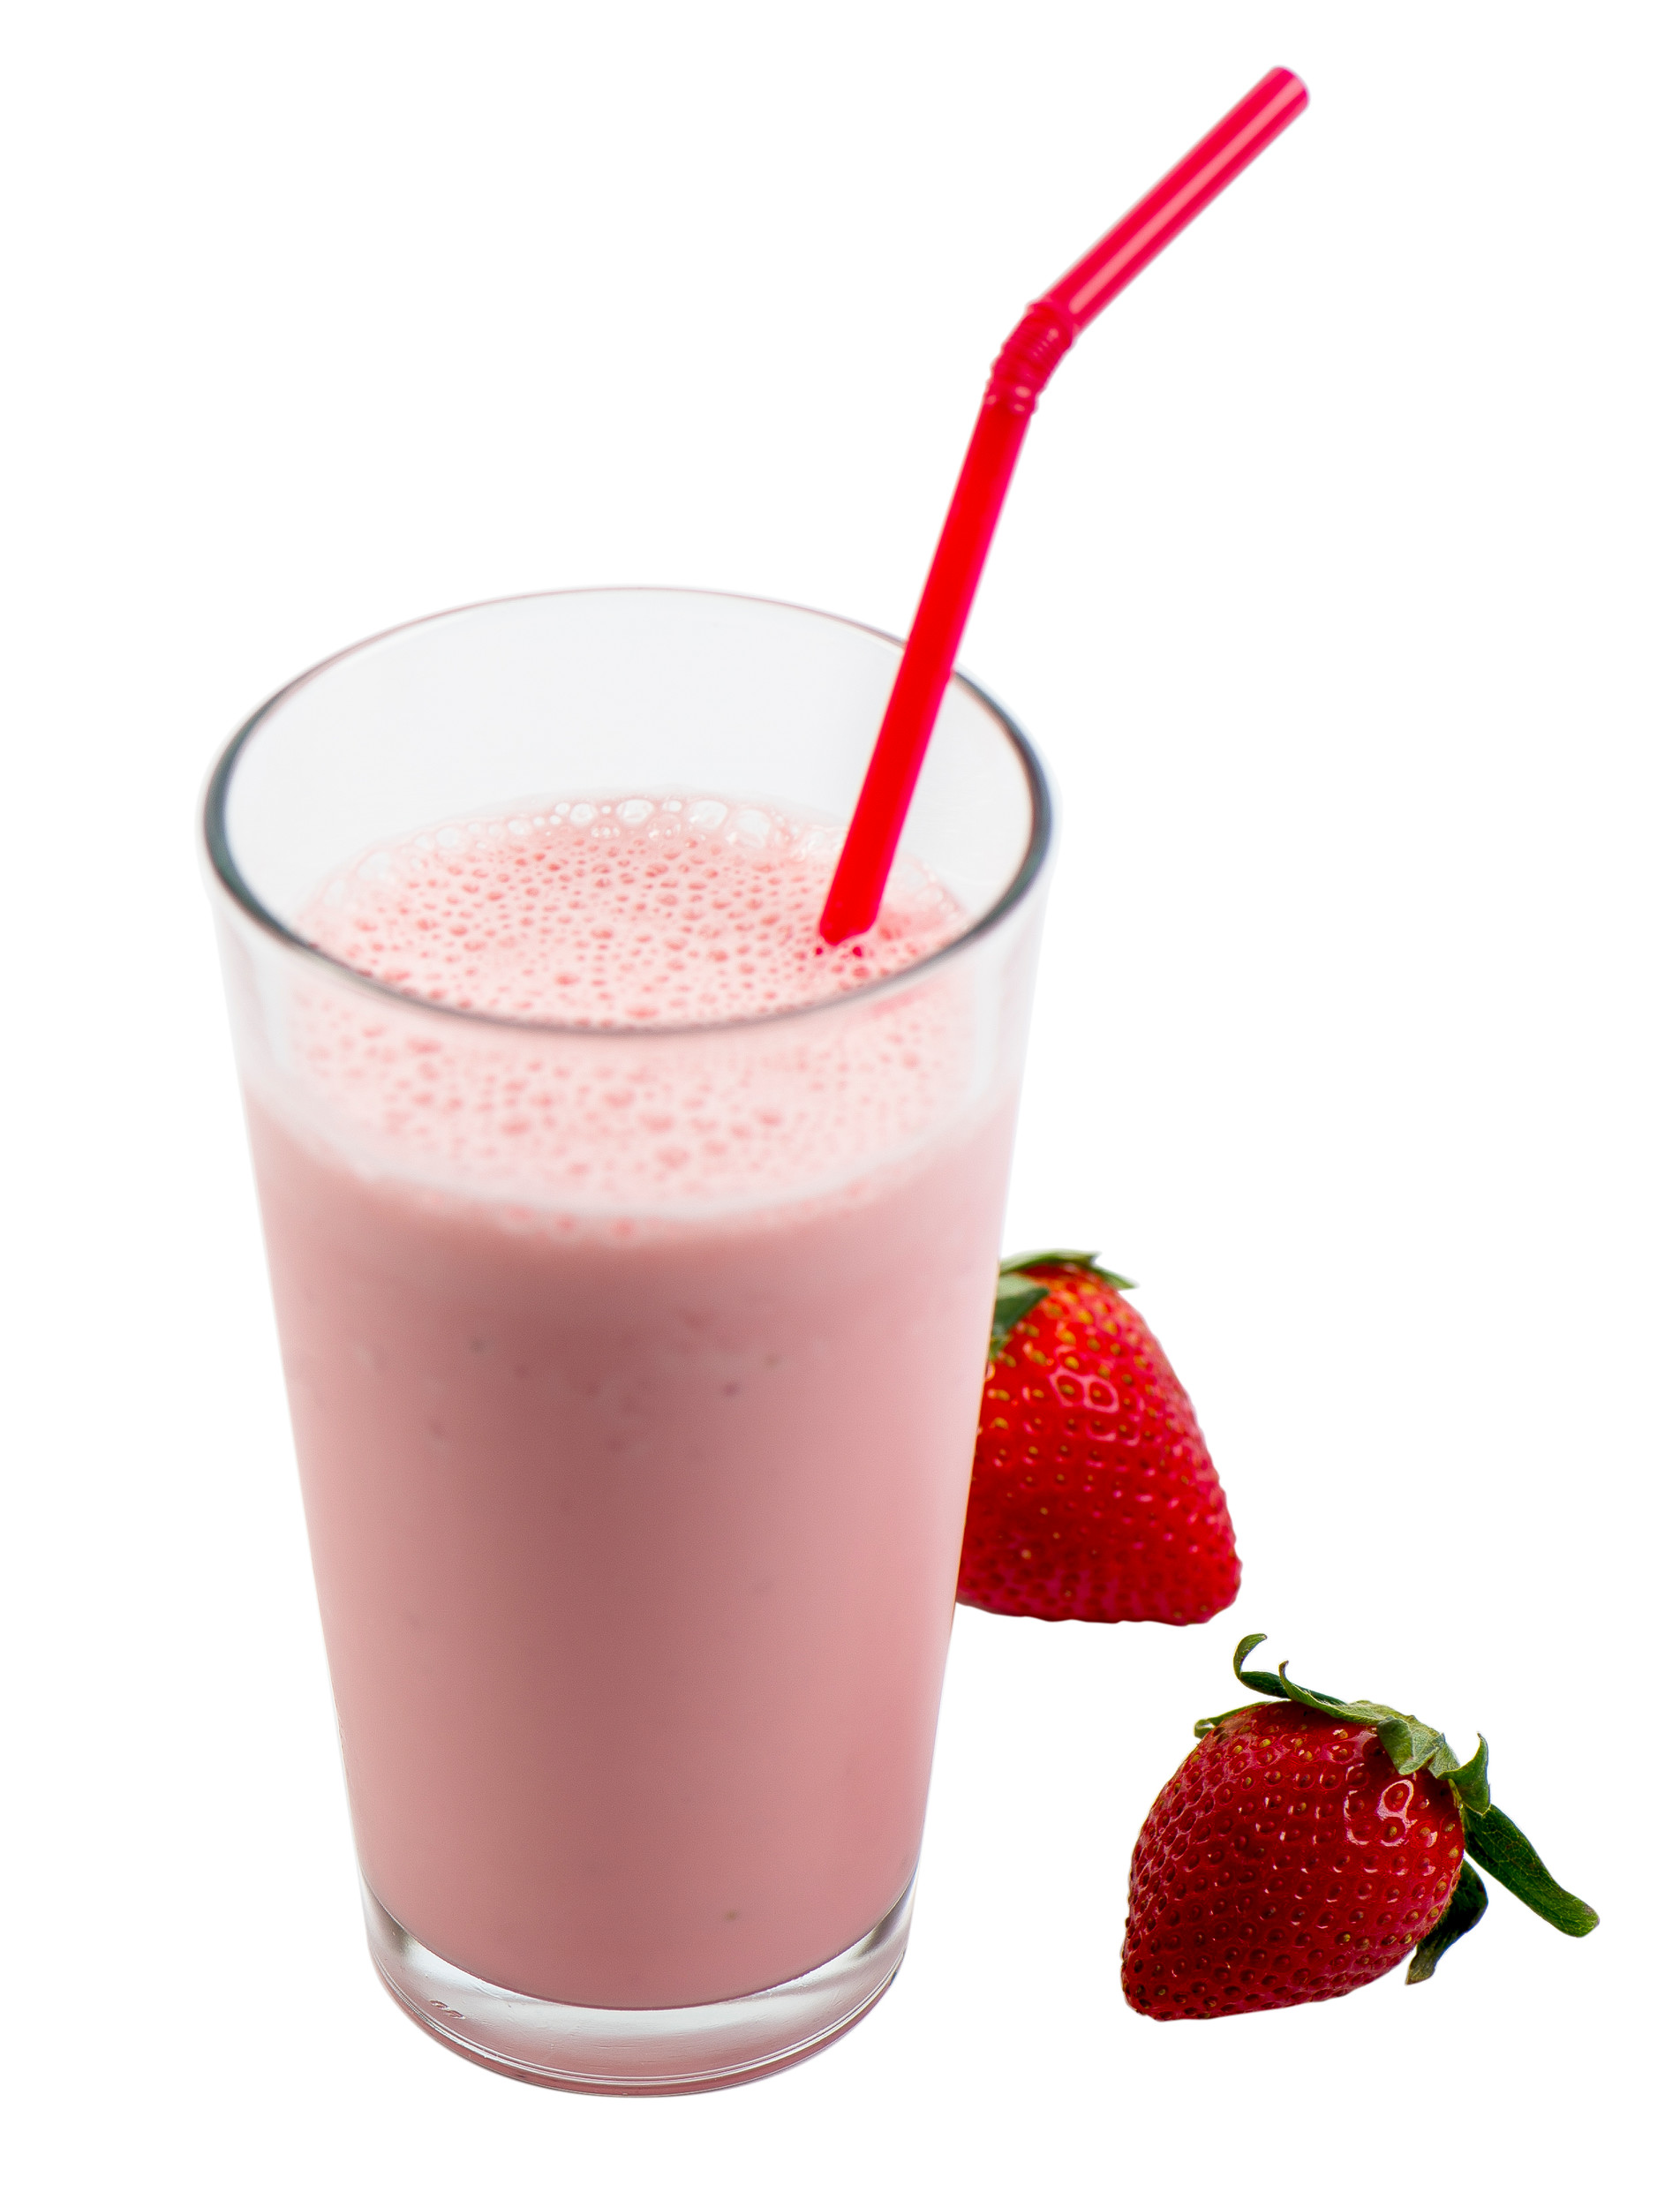 Strawberry smoothies are delicious on their own or when combined with other fruits.